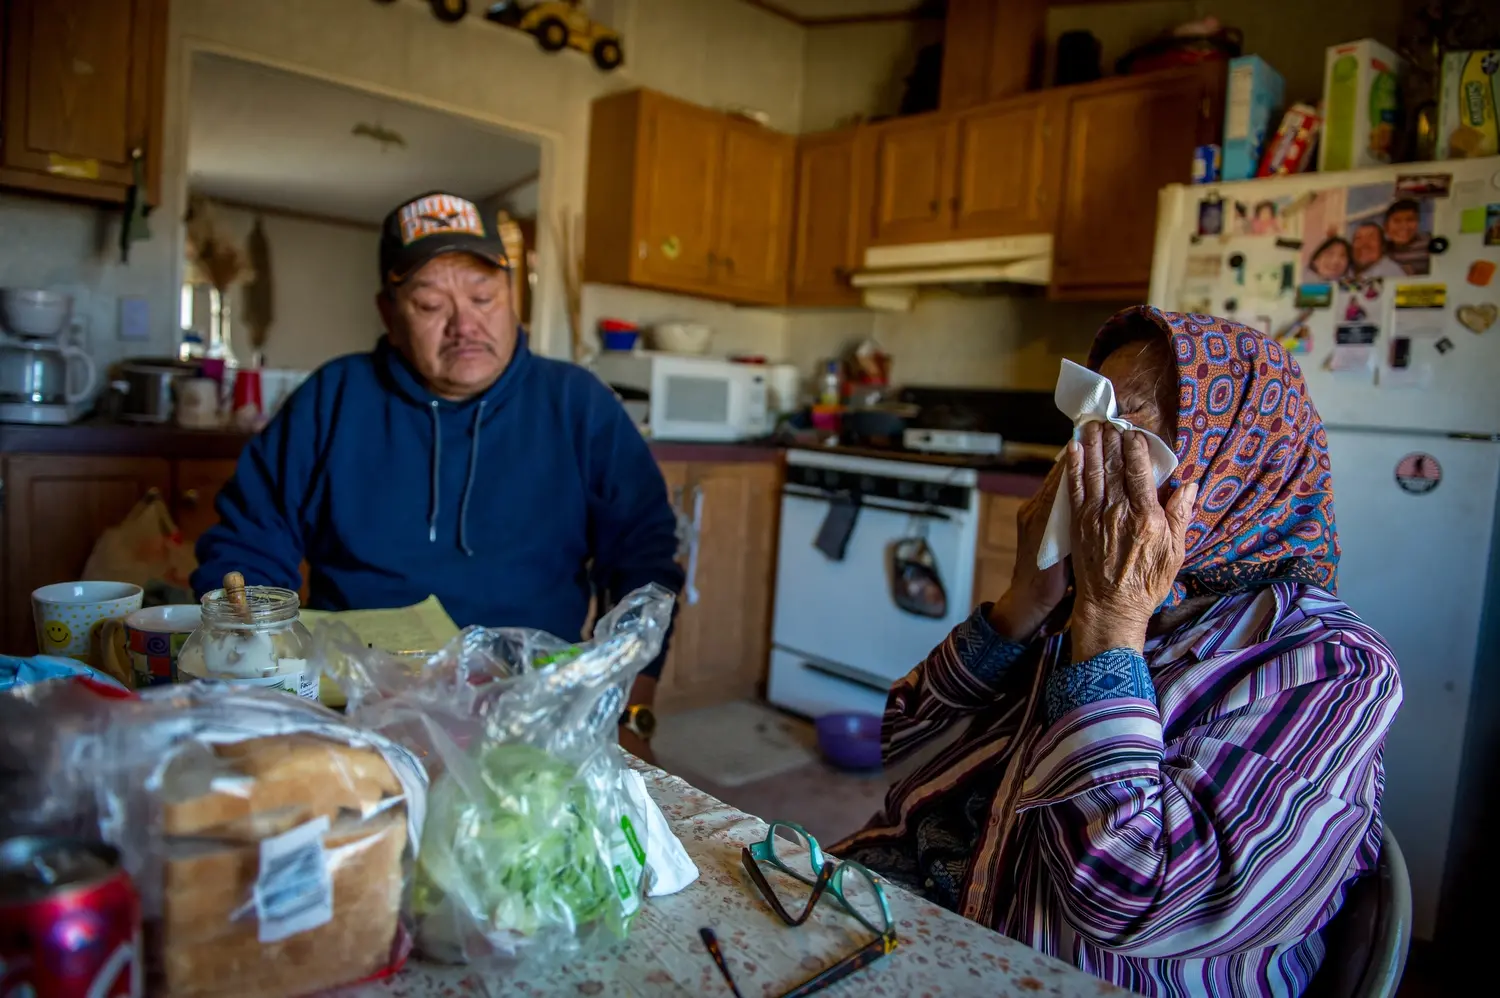 Aaron Yazzie and Helen Nez sit at a kitchen table.